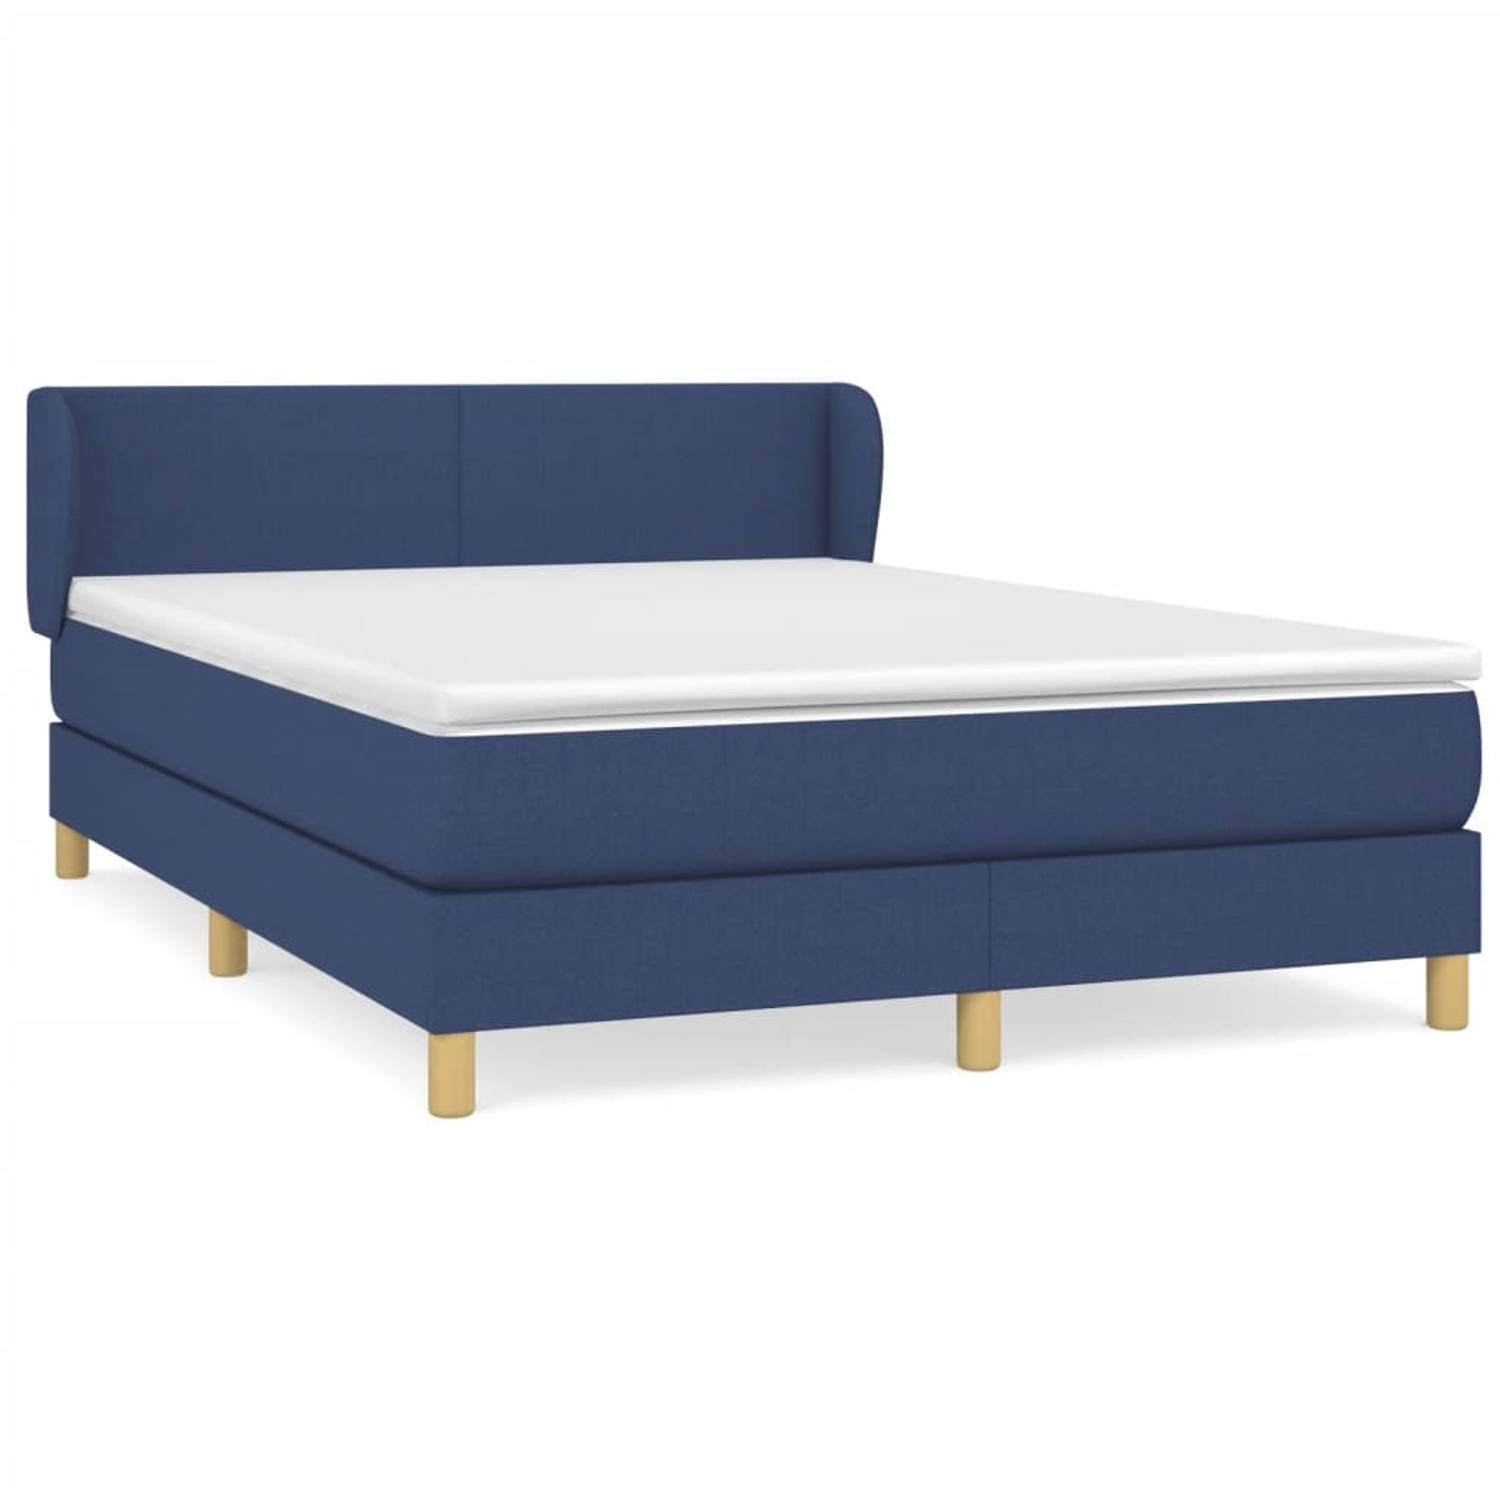 The Living Store Boxspringbed - Comfort - Bed - 193x147x78/88 cm - Blauw